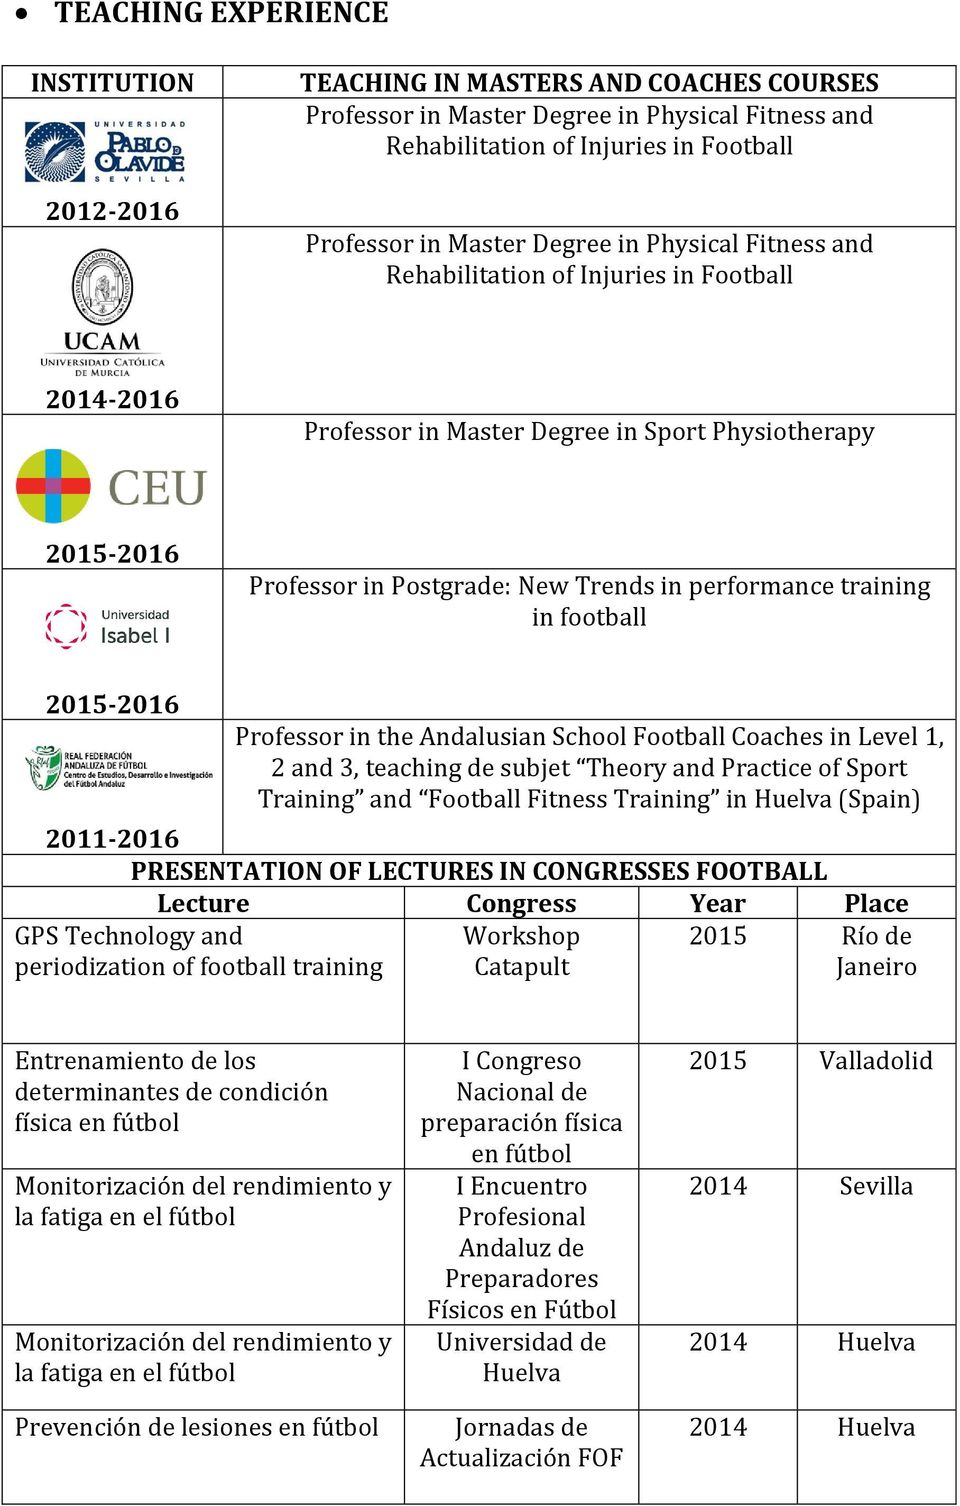 football 2015-2016 Professor in the Andalusian School Football Coaches in Level 1, 2 and 3, teaching de subjet Theory and Practice of Sport Training and Football Fitness Training in Huelva (Spain)